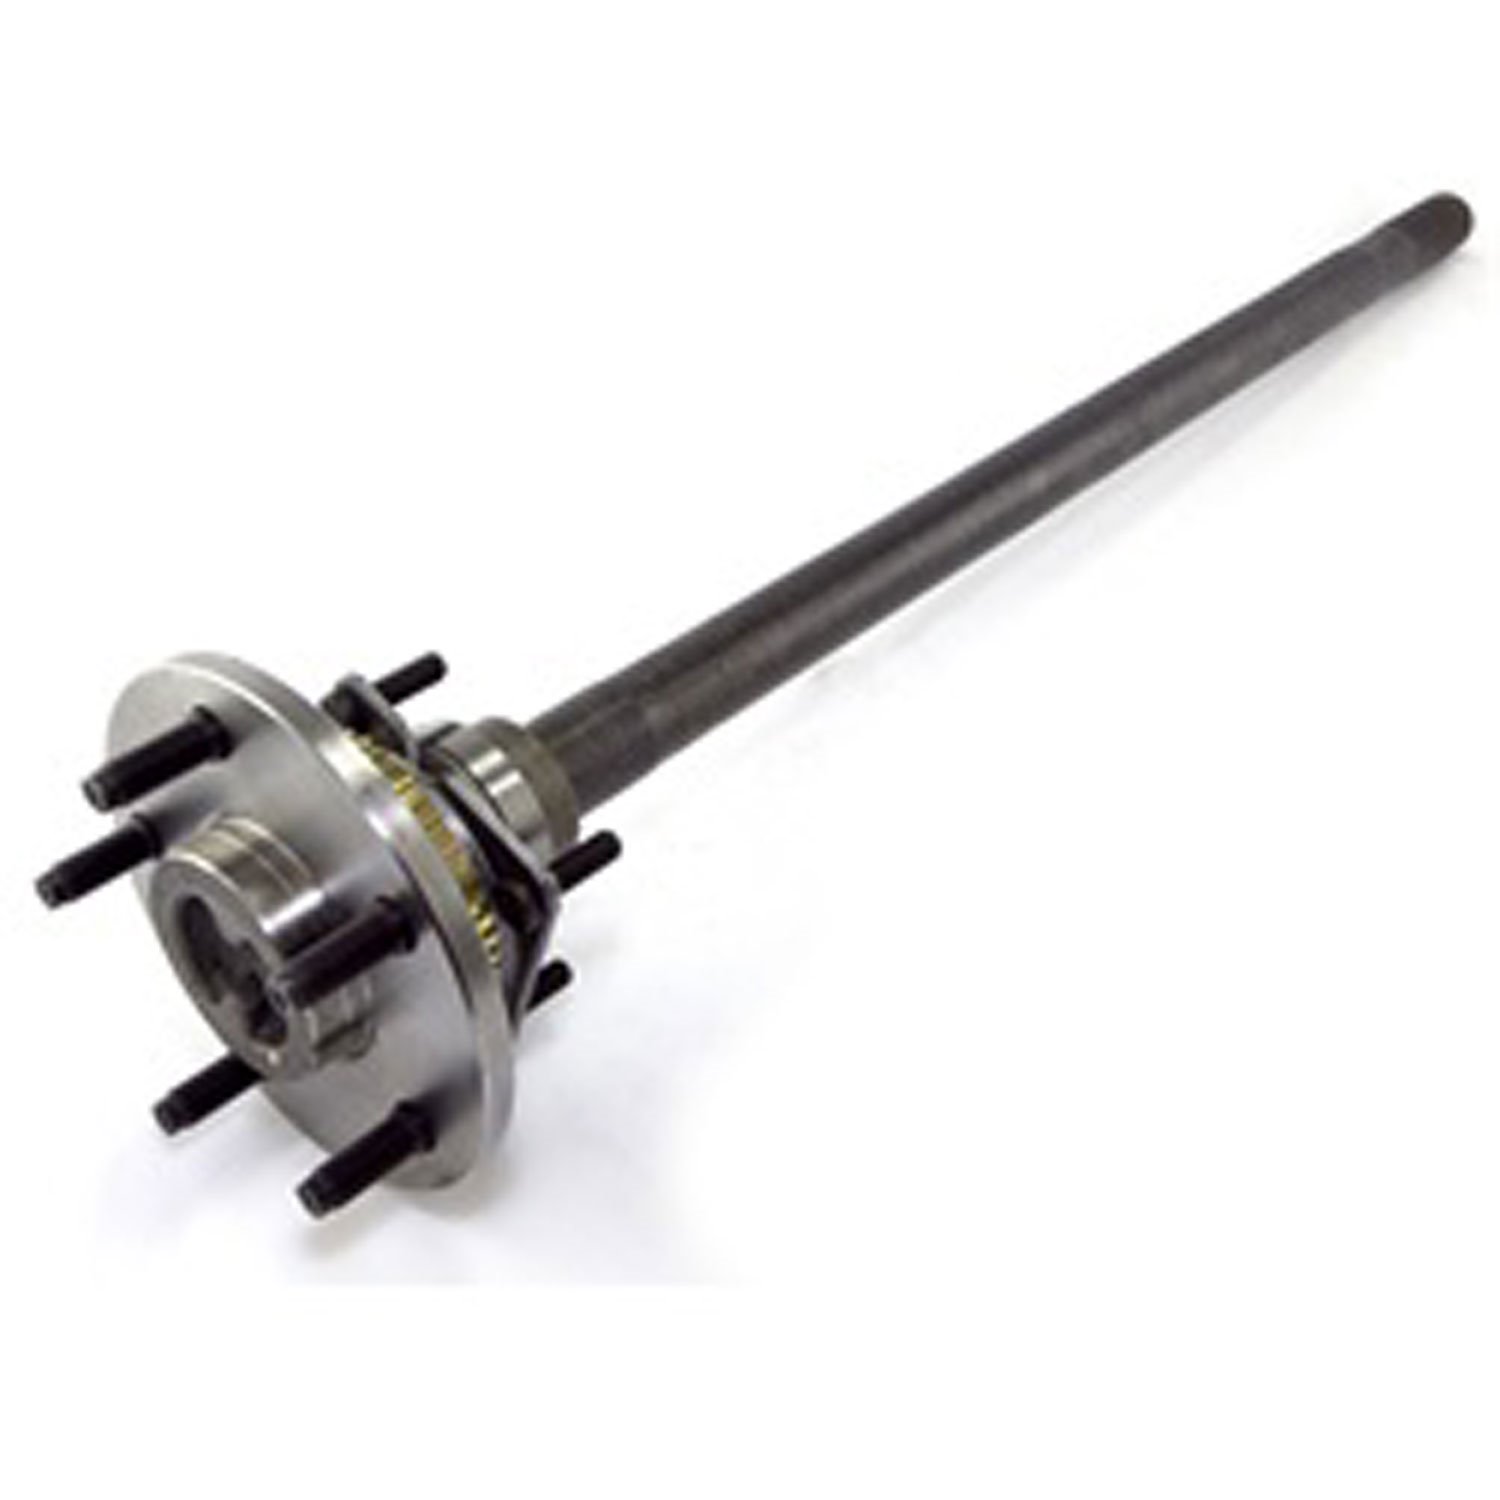 This rear axle shaft for Dana 44 from Alloy USA fits the left side. Fits 99-04 Jeep Grand Cherokee W